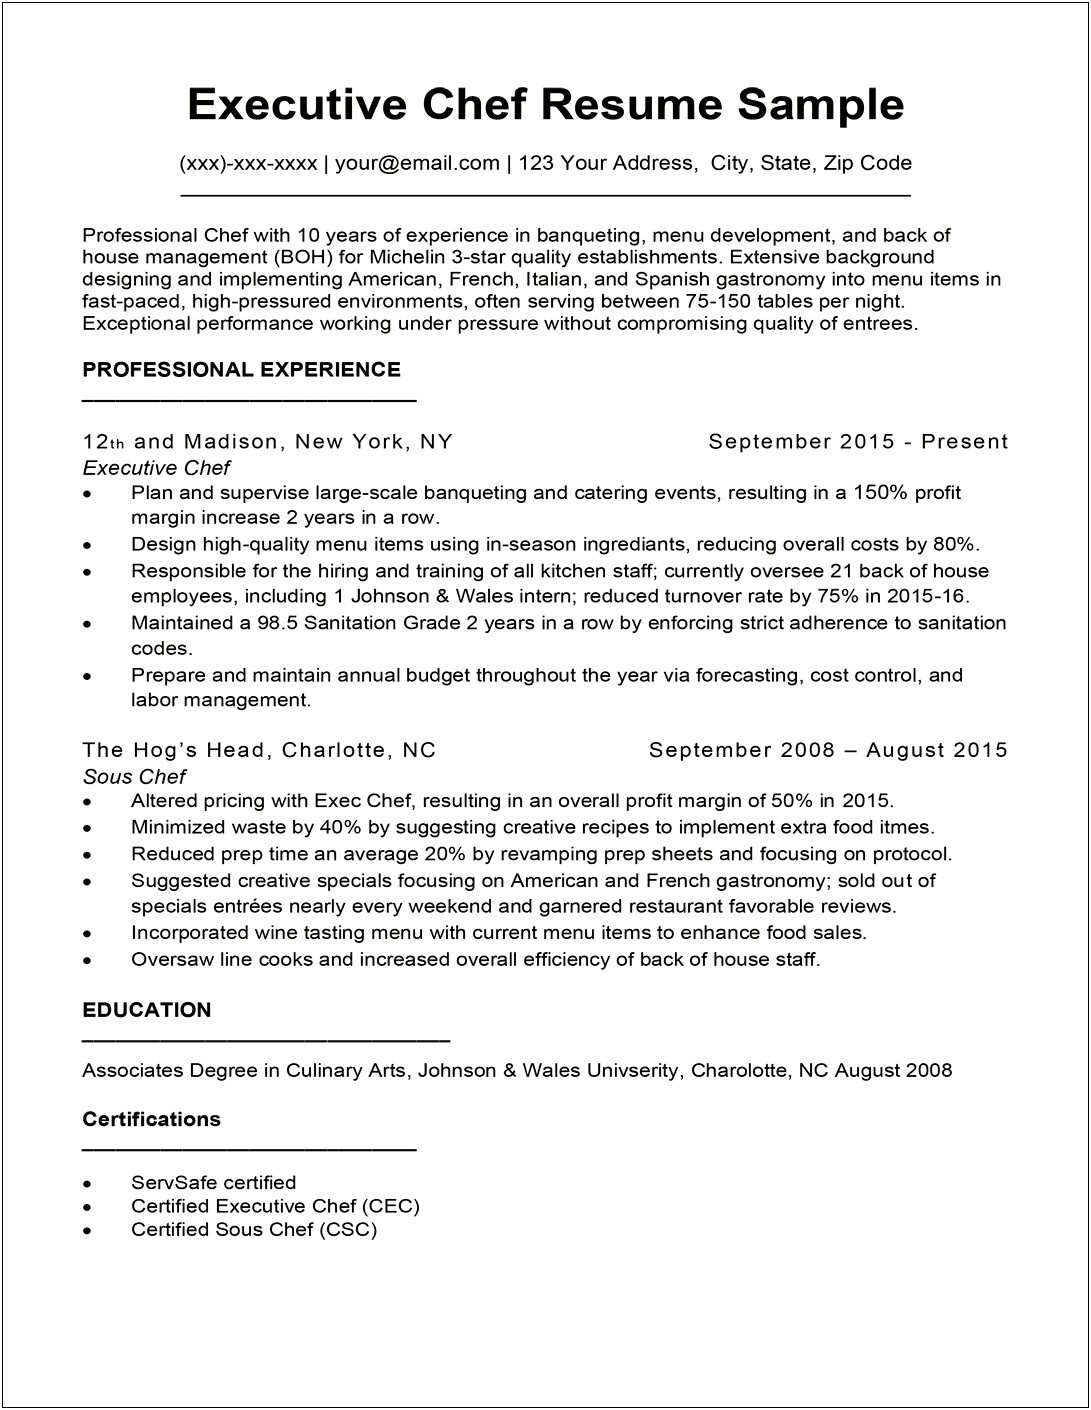 Resume Objective For Chef Position